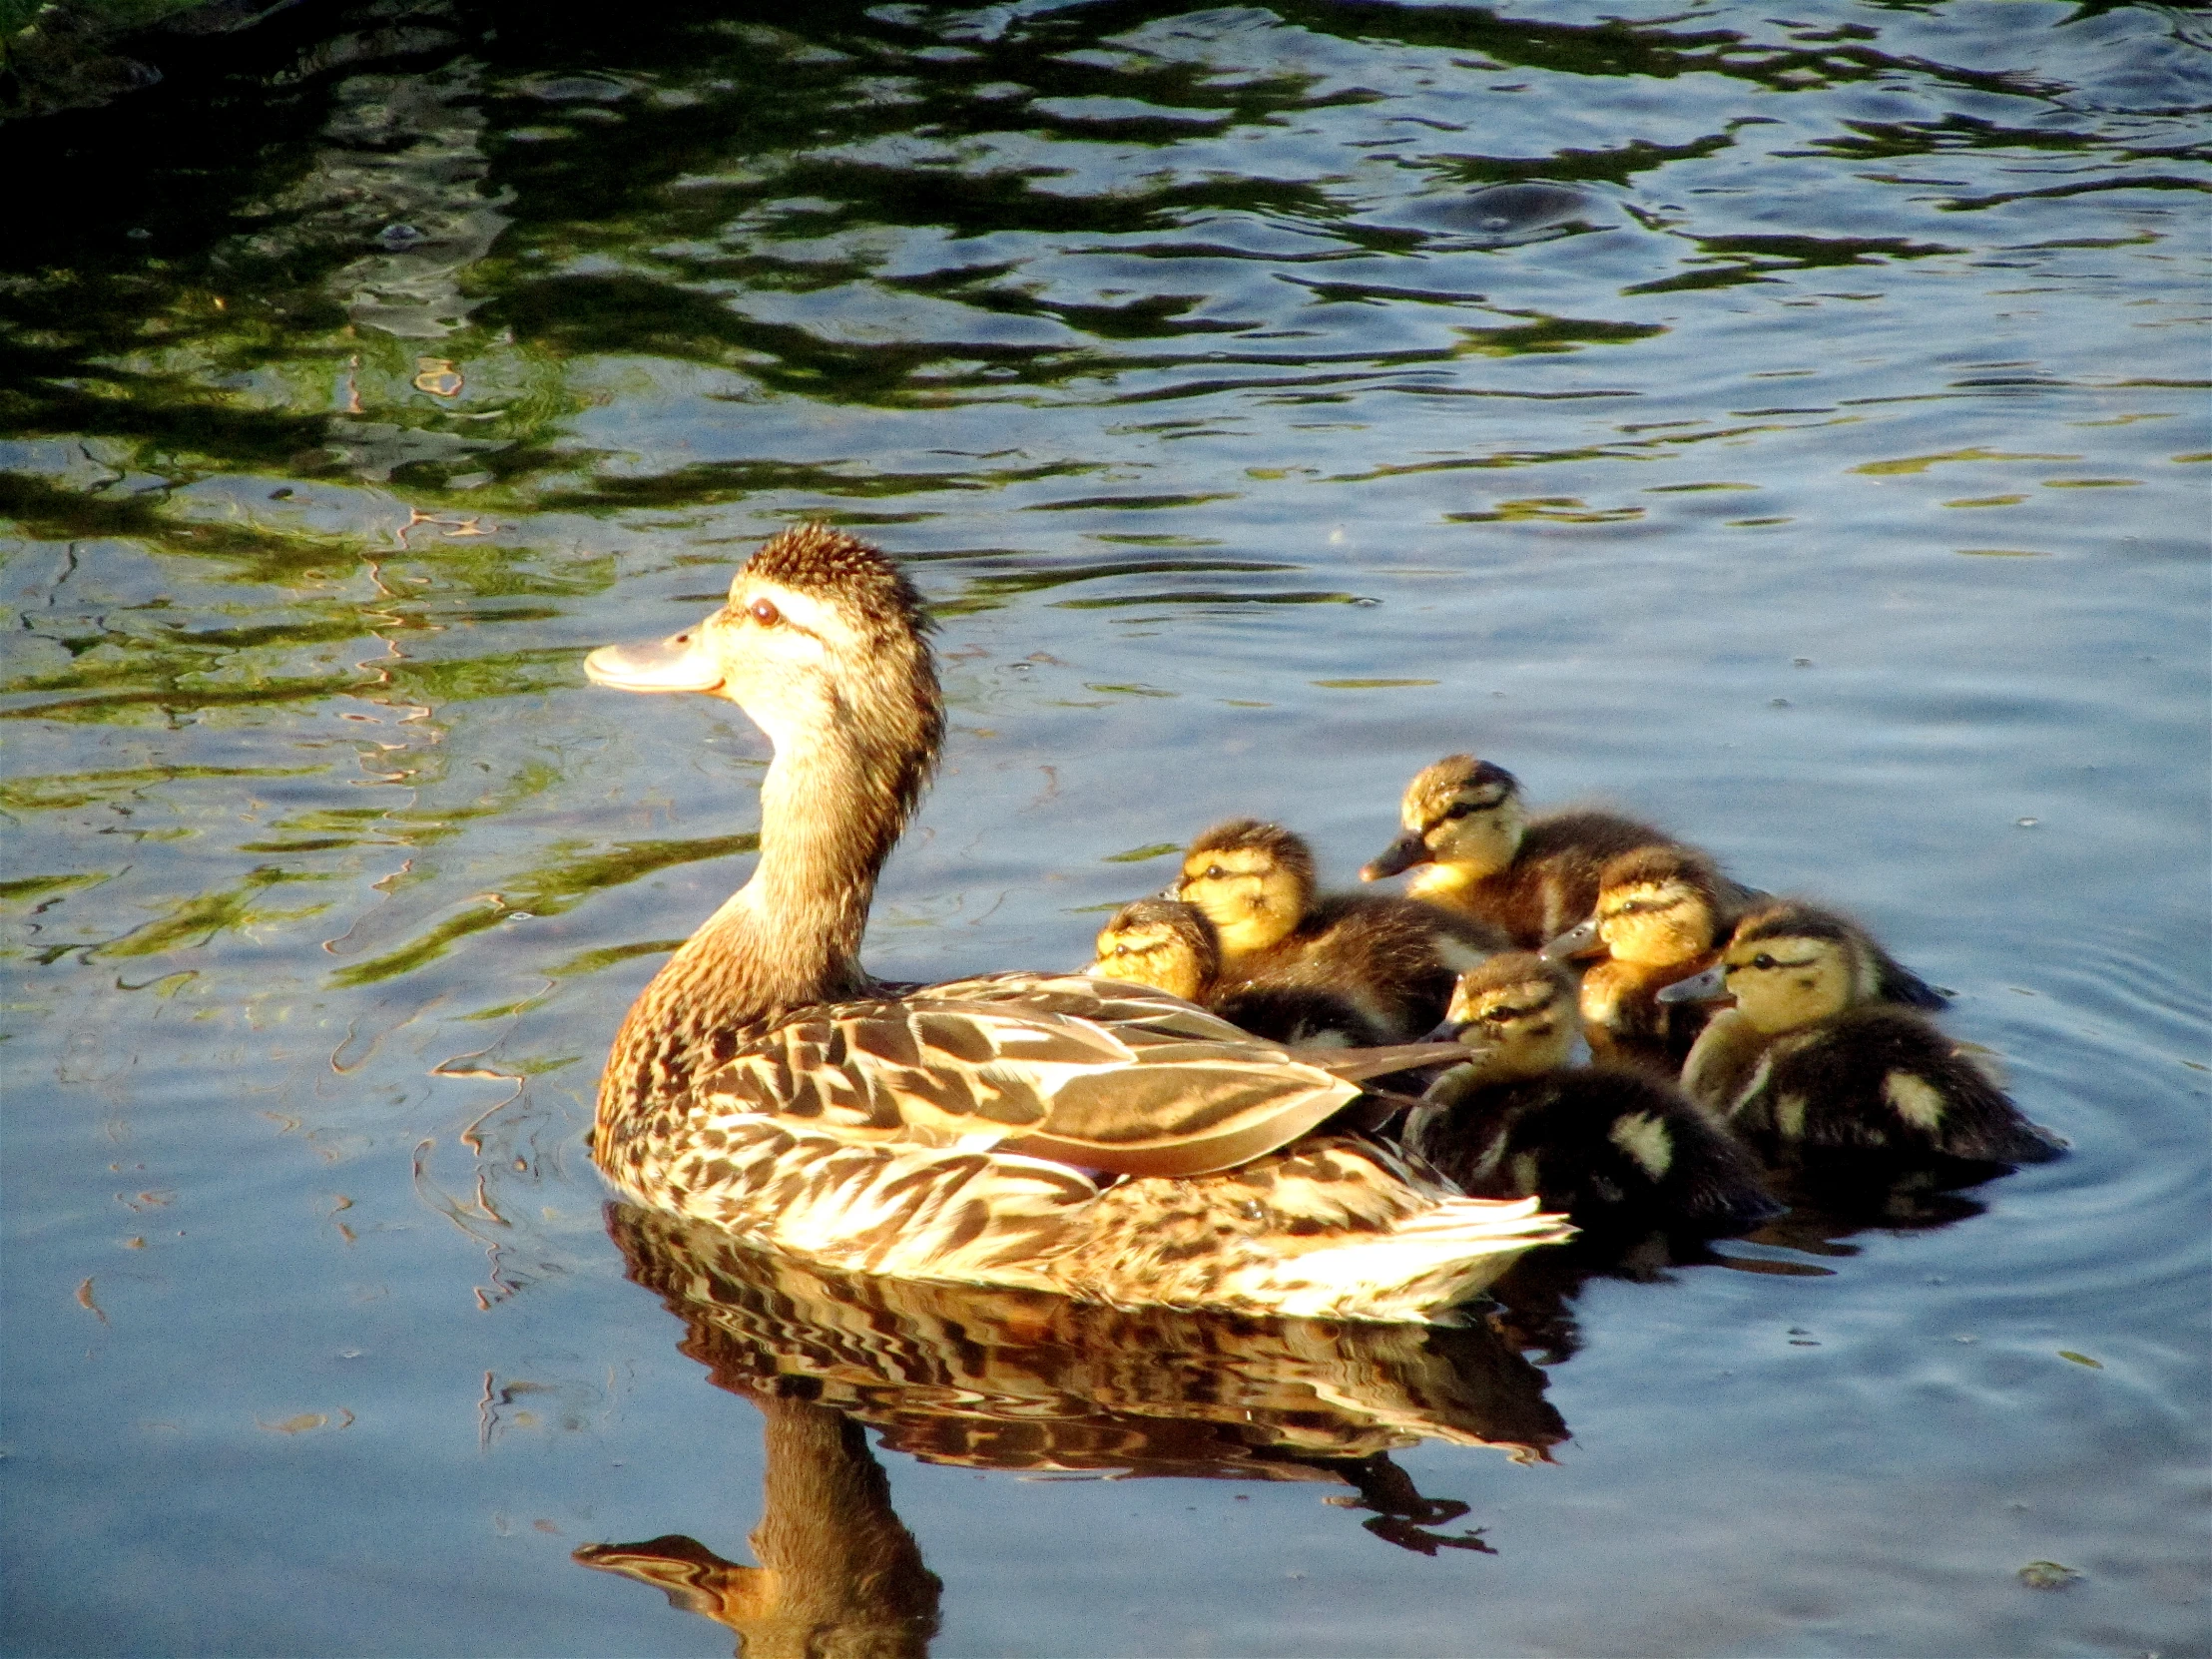 the ducklings are being followed by their mom